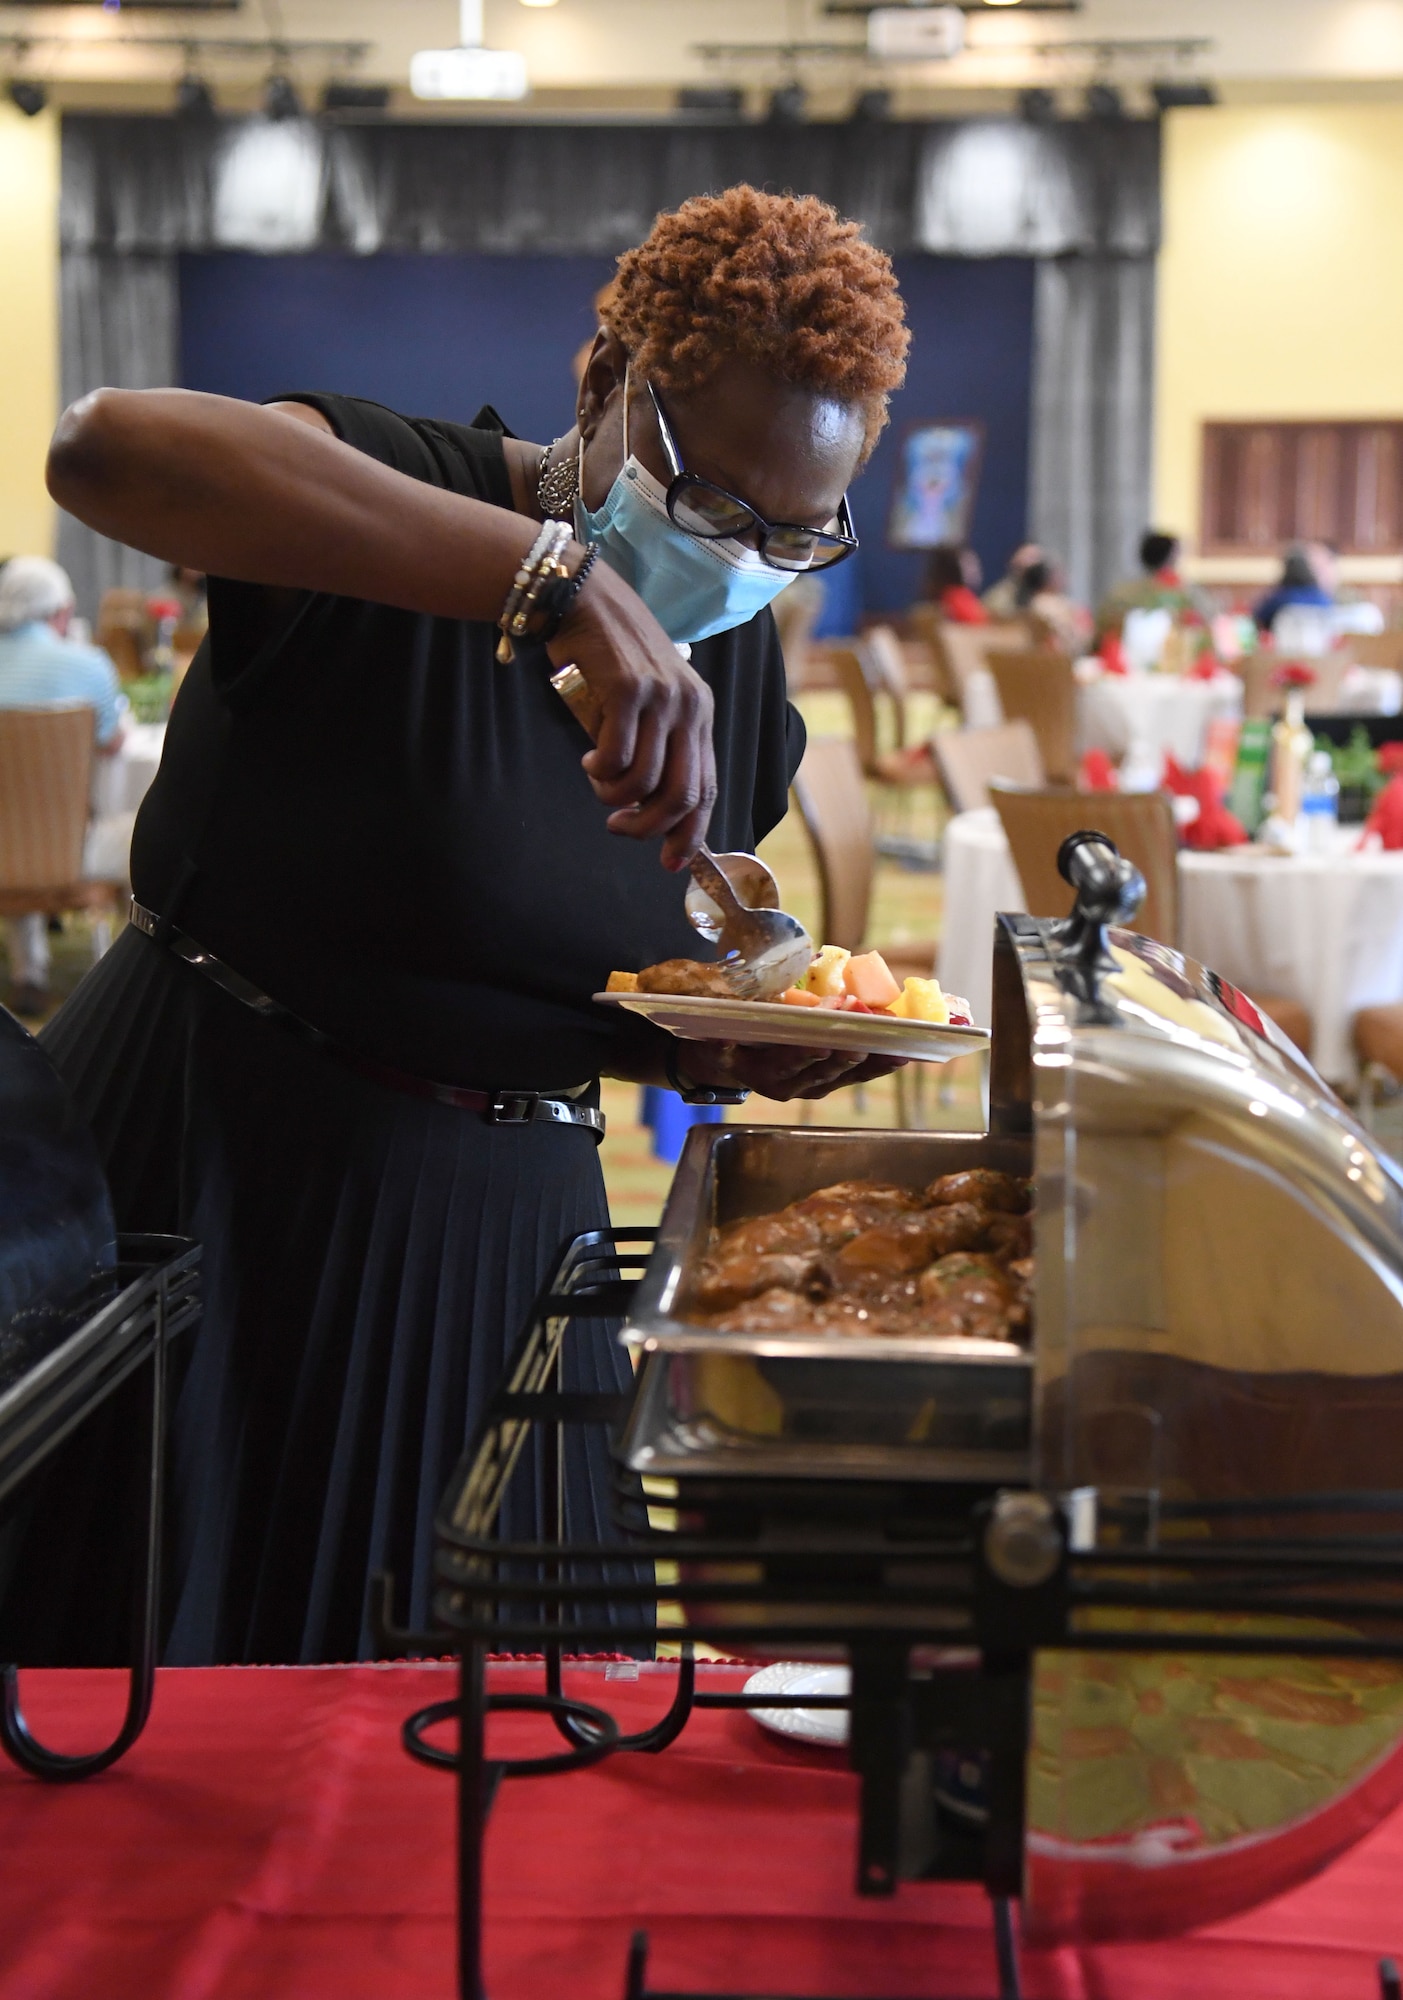 Ruby Bordley, 81st Force Support Squadron Air Force aid officer, prepares a plate of food during the Black History Month Gospel Brunch inside the Bay Breeze Event Center at Keesler Air Force Base, Mississippi, Feb. 22, 2022. This year's theme for Black History Month, which is celebrated throughout February, is black health and wellness. (U.S. Air Force photo by Kemberly Groue)